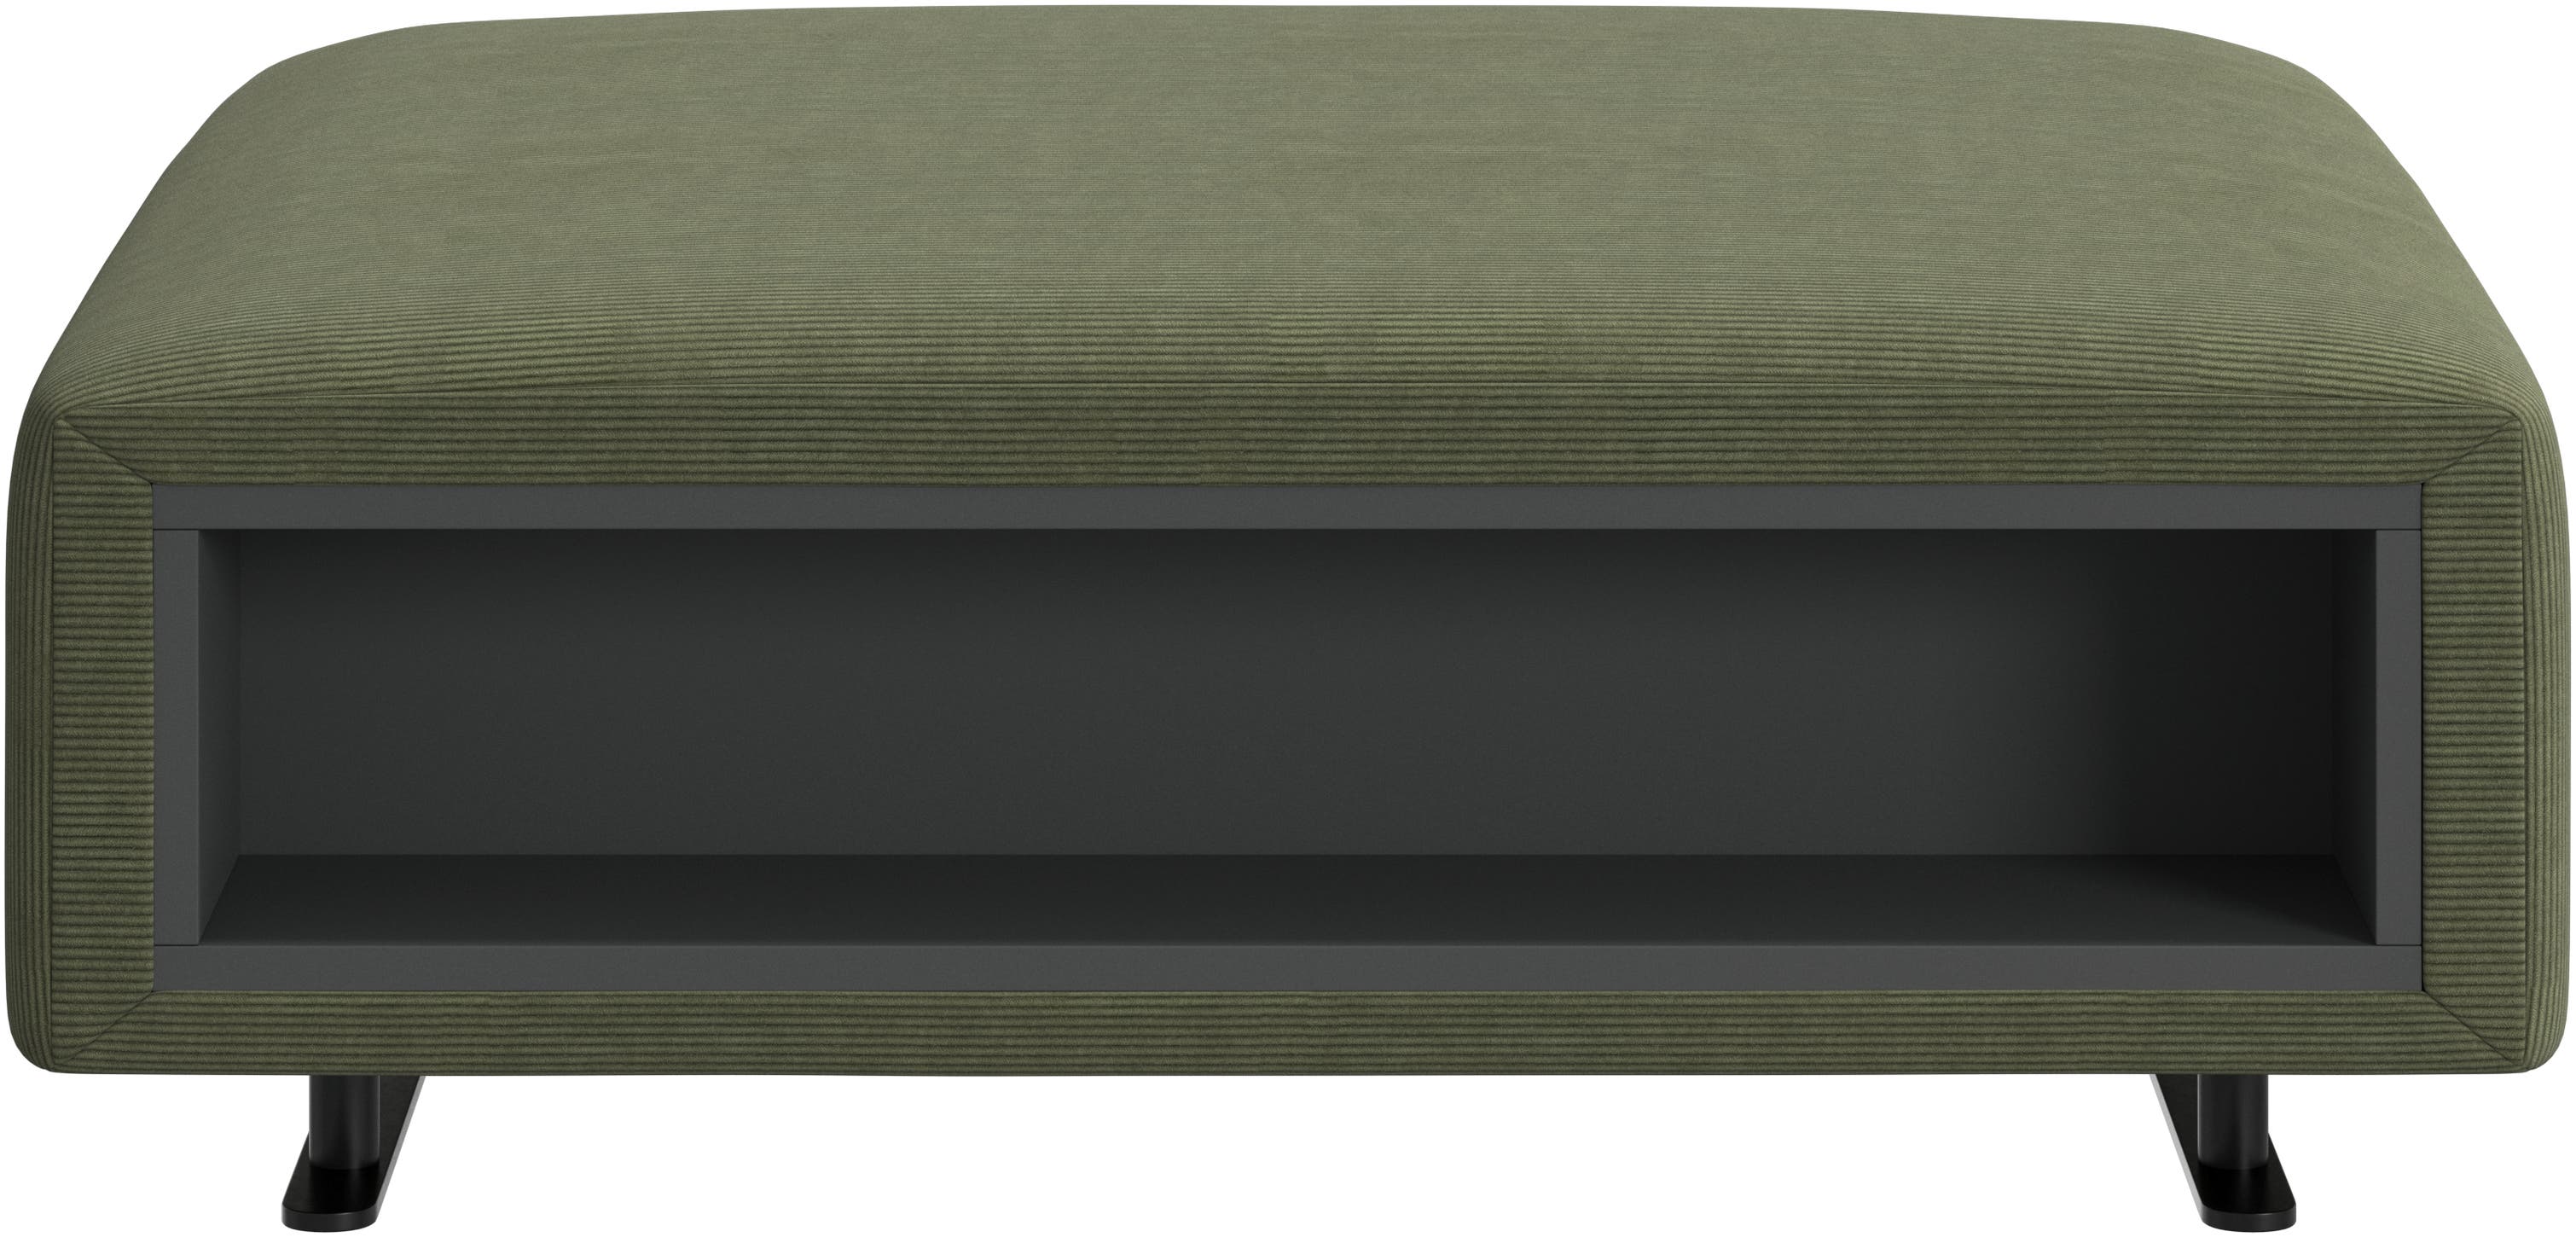 Hampton footstool with storage left and right sides